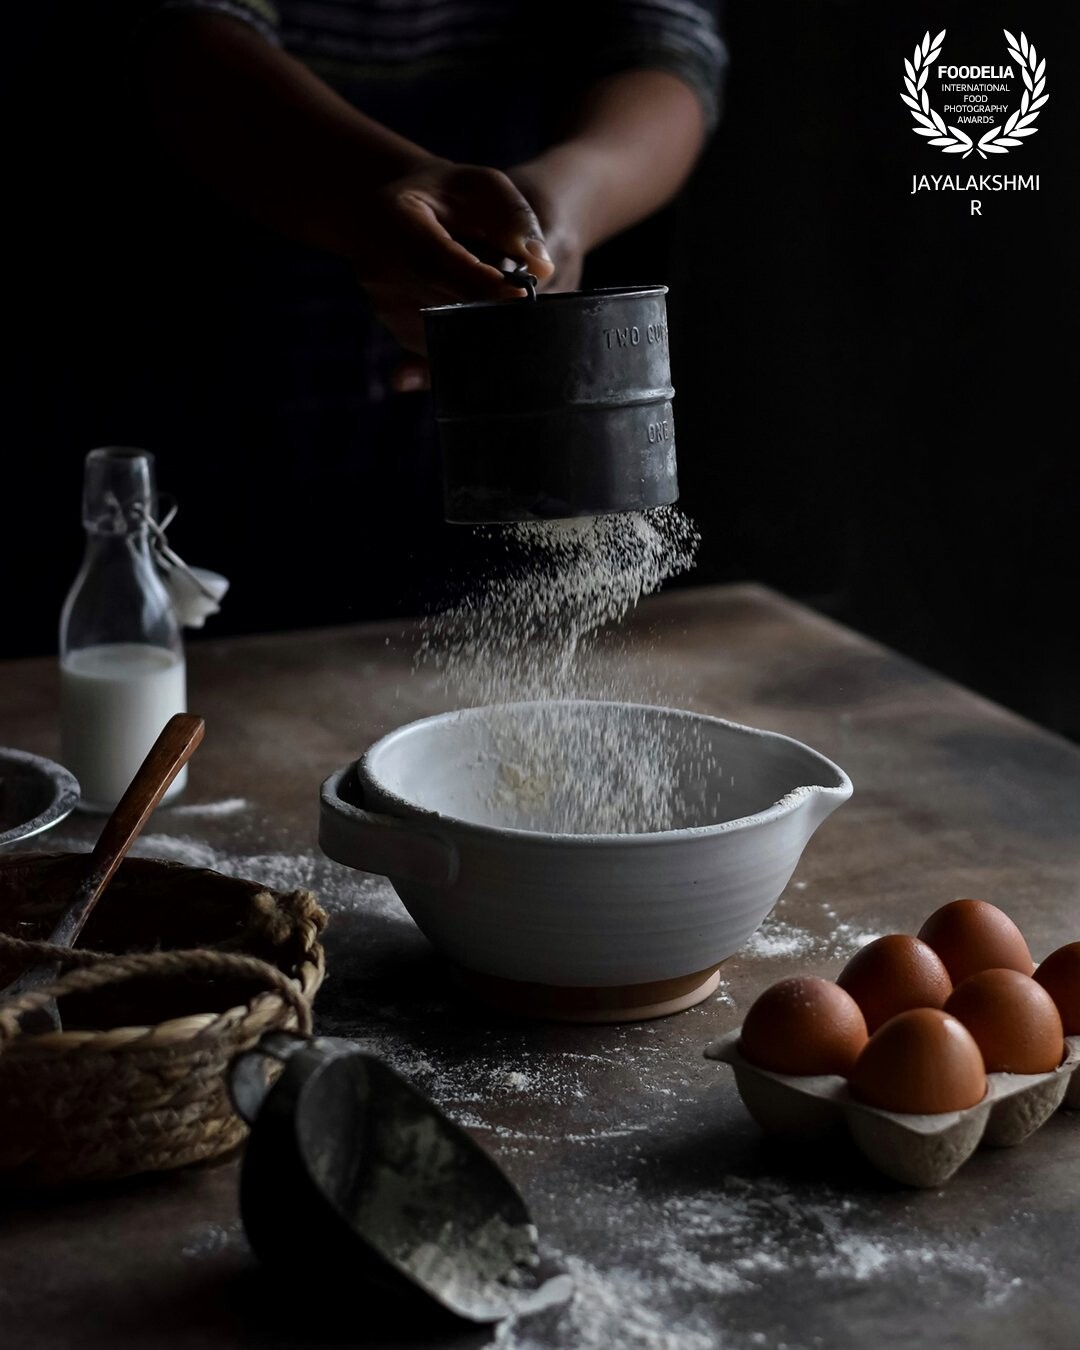 A process shot from my long pending list . Wanted to capture a process shot , involving a flour drizzle action . Set up a regular baking scene . Shot in natural light and brought out a moody light set up.